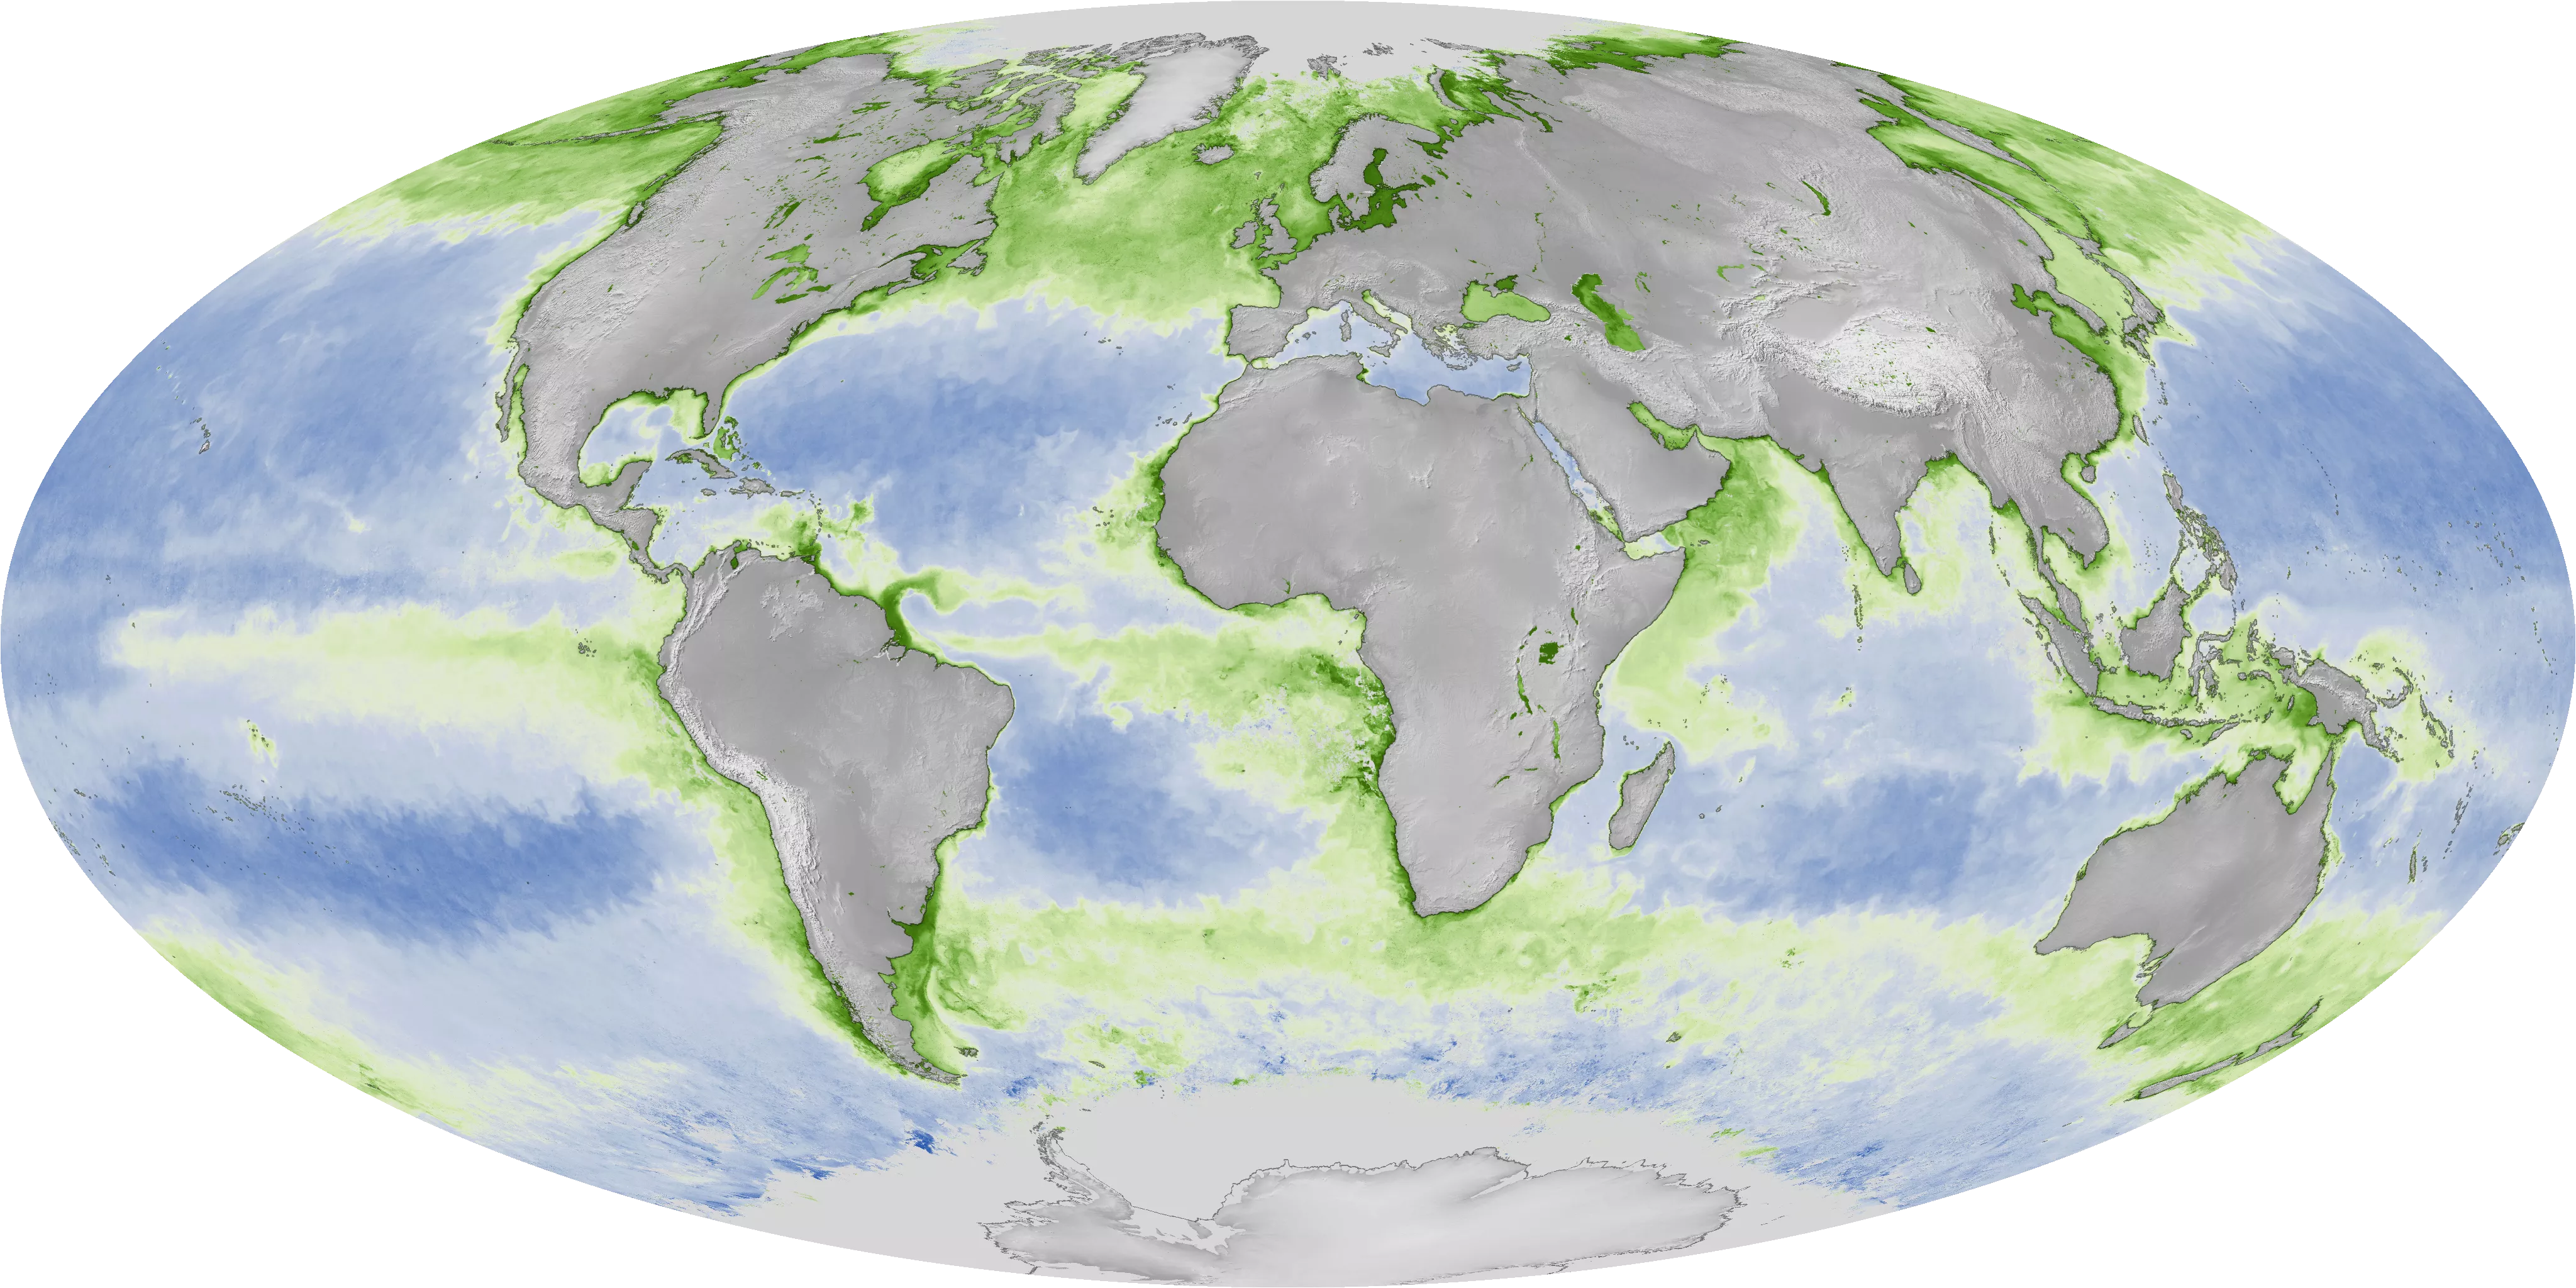 Earth image from NOAA